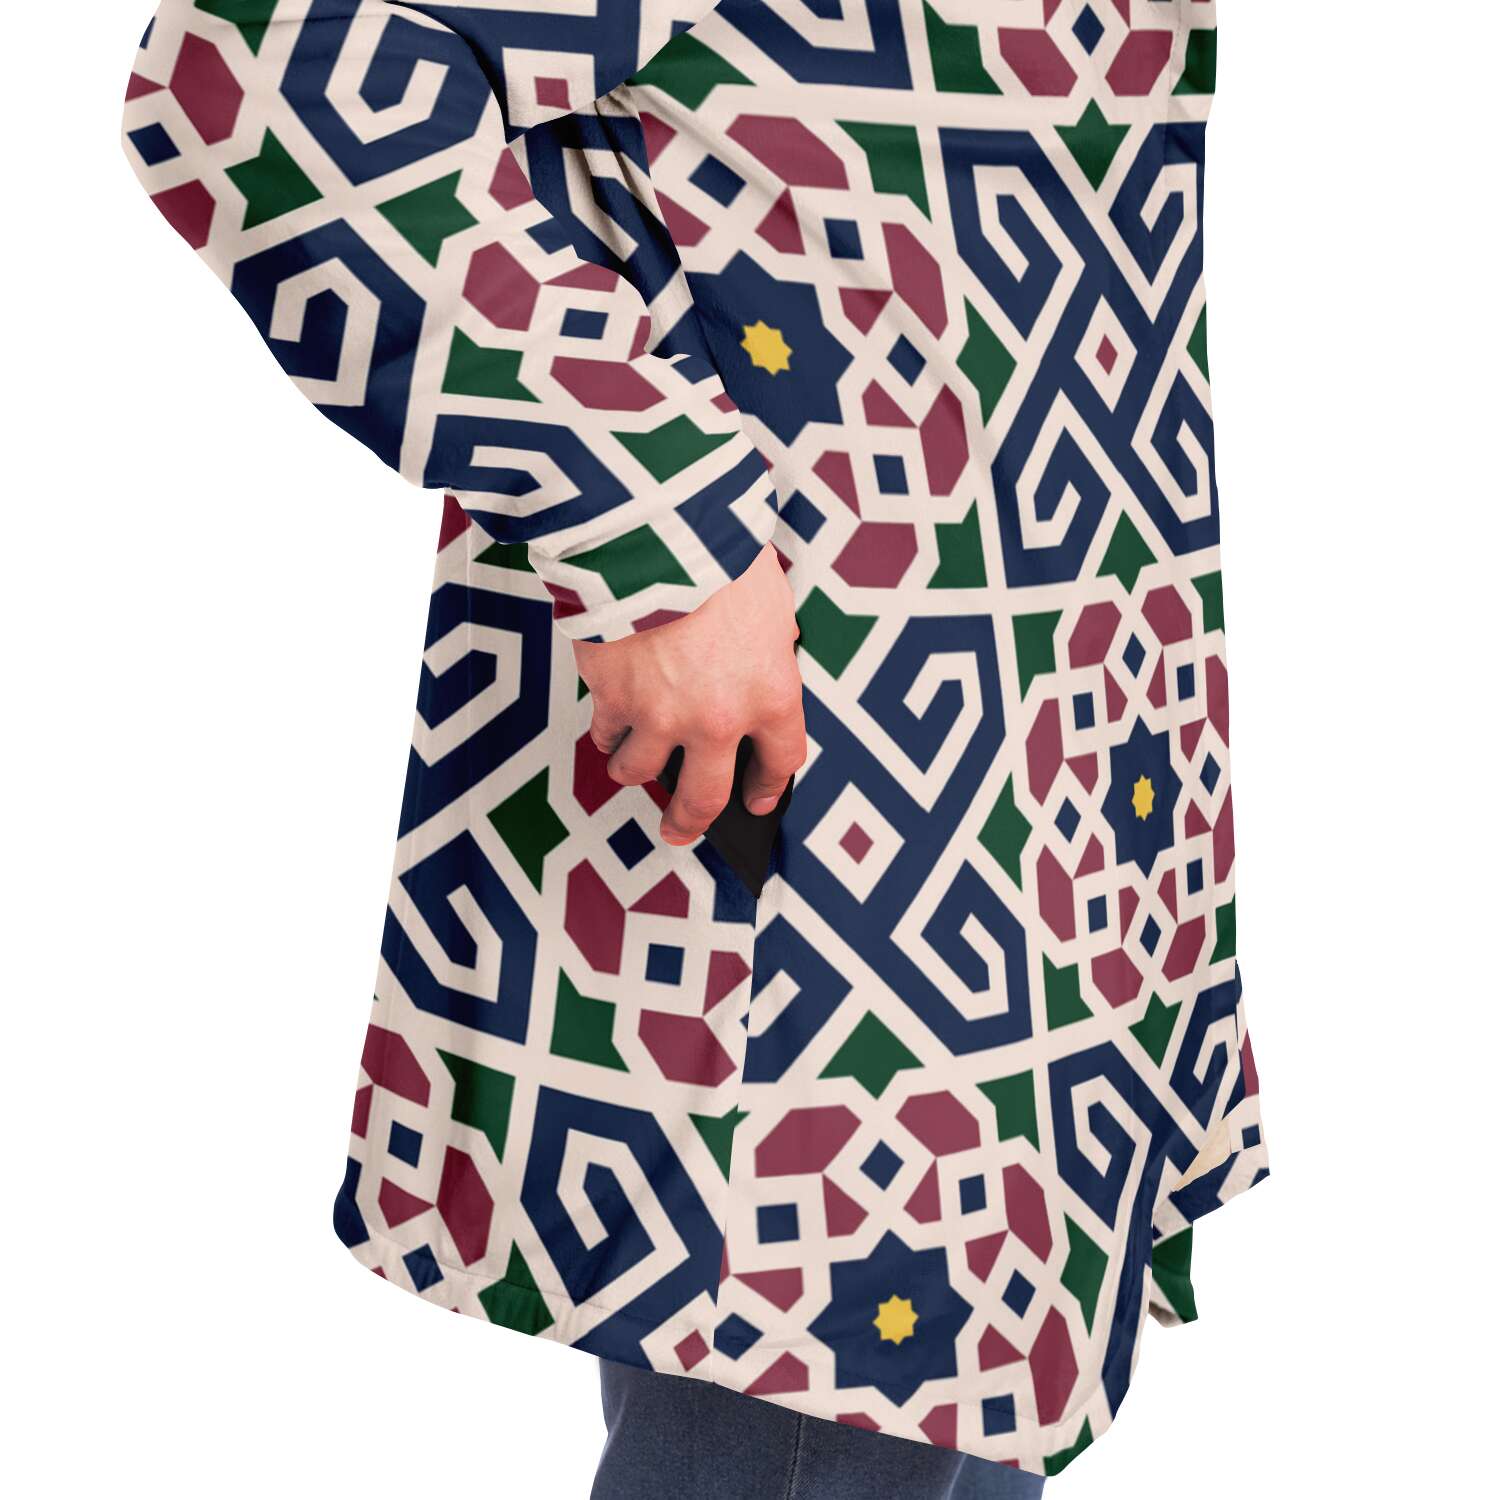 The Miracle of the East Moroccan Microfleece Cloak DromedarShop.com Online Boutique